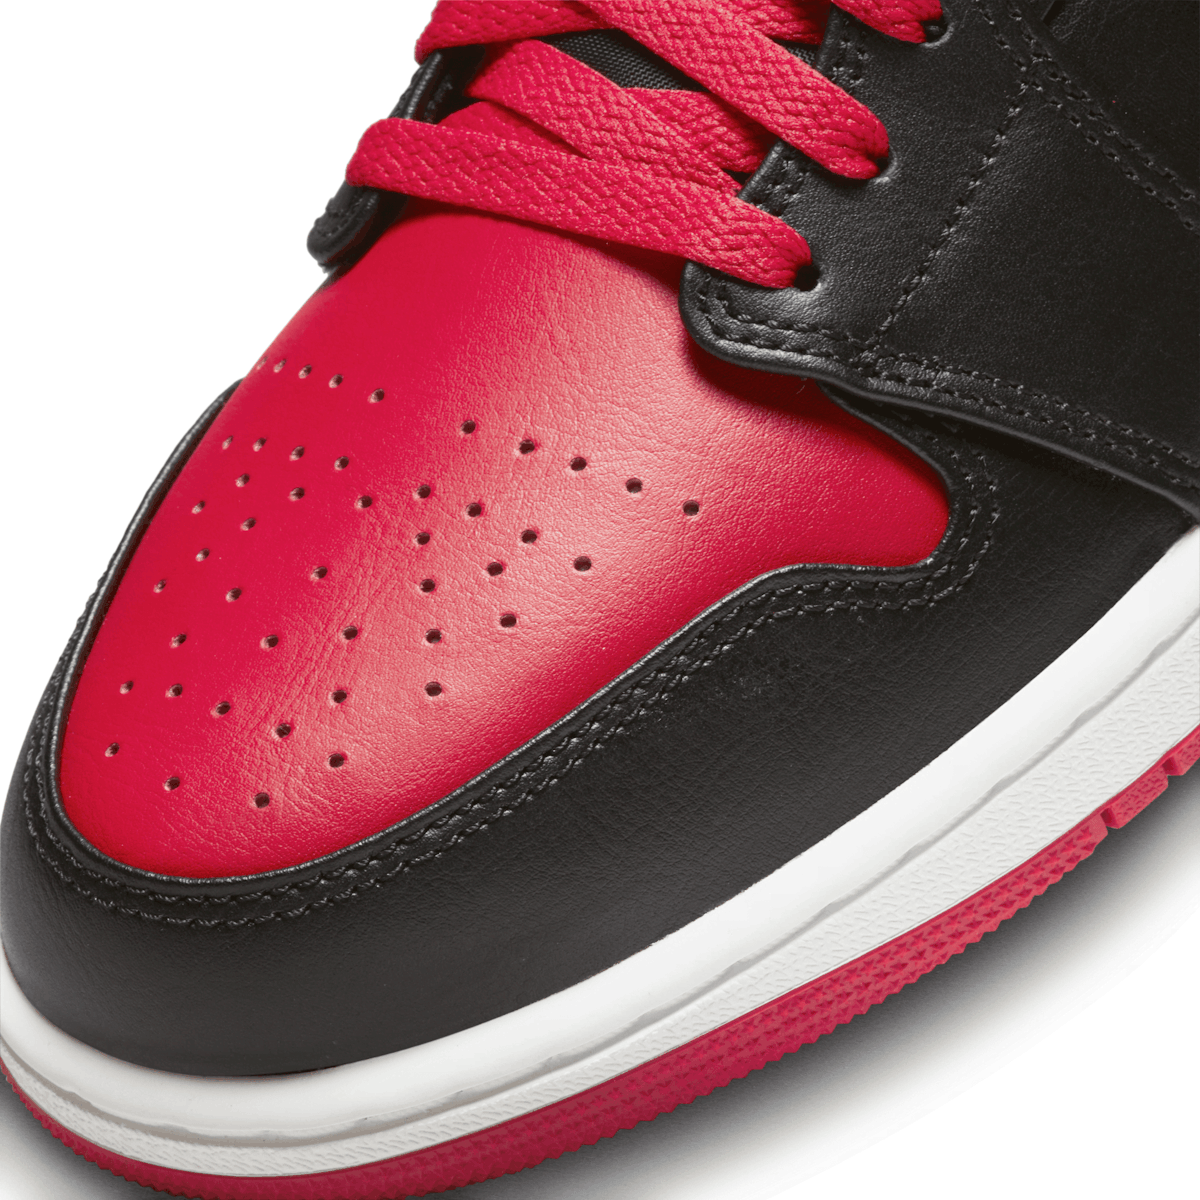 This Air Jordan 1 Mid References The Legendary Bred - Sneaker News